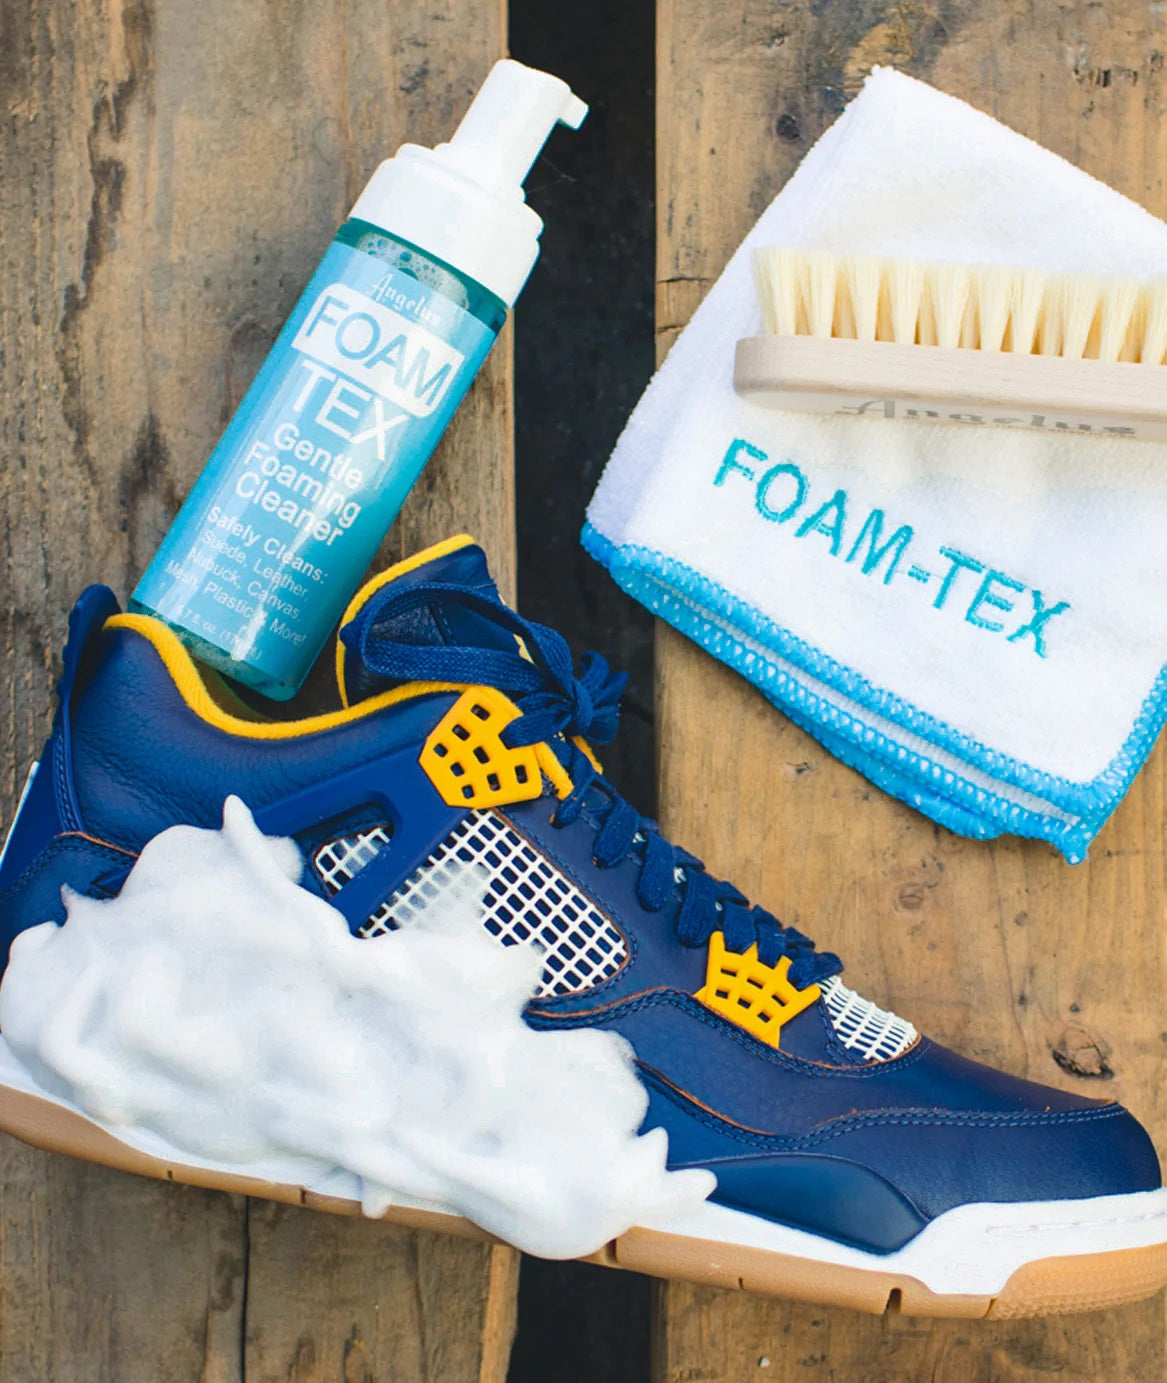 Shoozas Foam Shoe Cleaner - No Water Needed, Quick Dry, Non-Toxic, Best for Leather, Plastic, Rubber, Soles